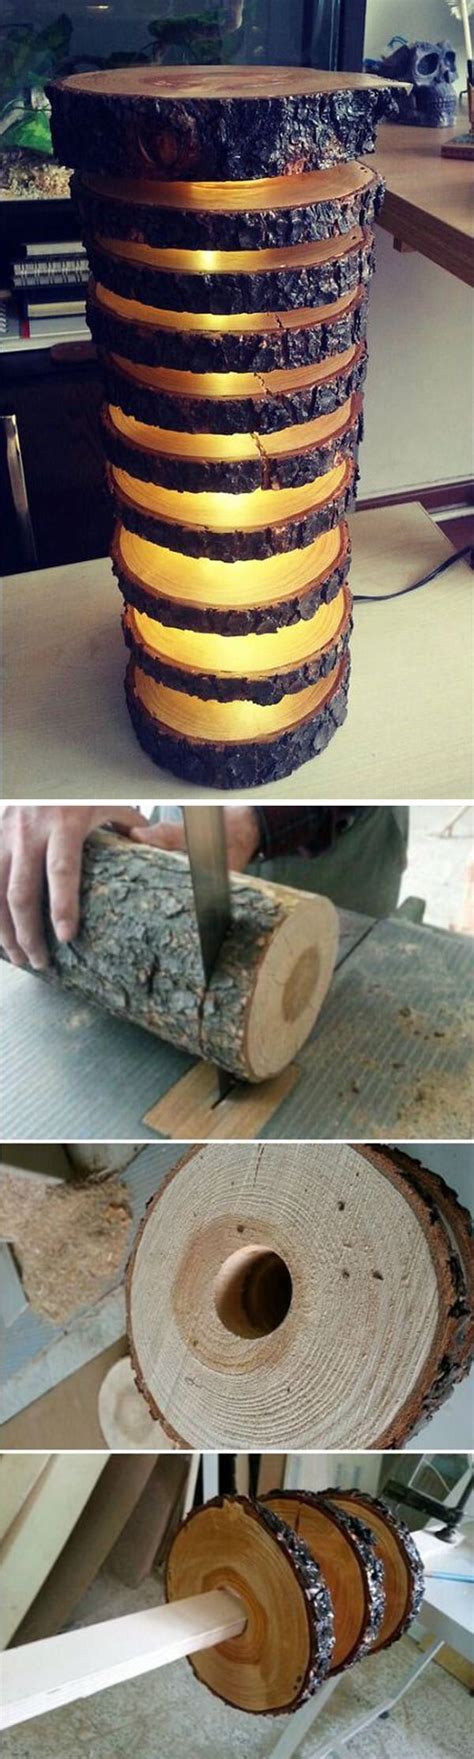 32 Best Diy Wood Craft Projects Ideas And Designs For 2017